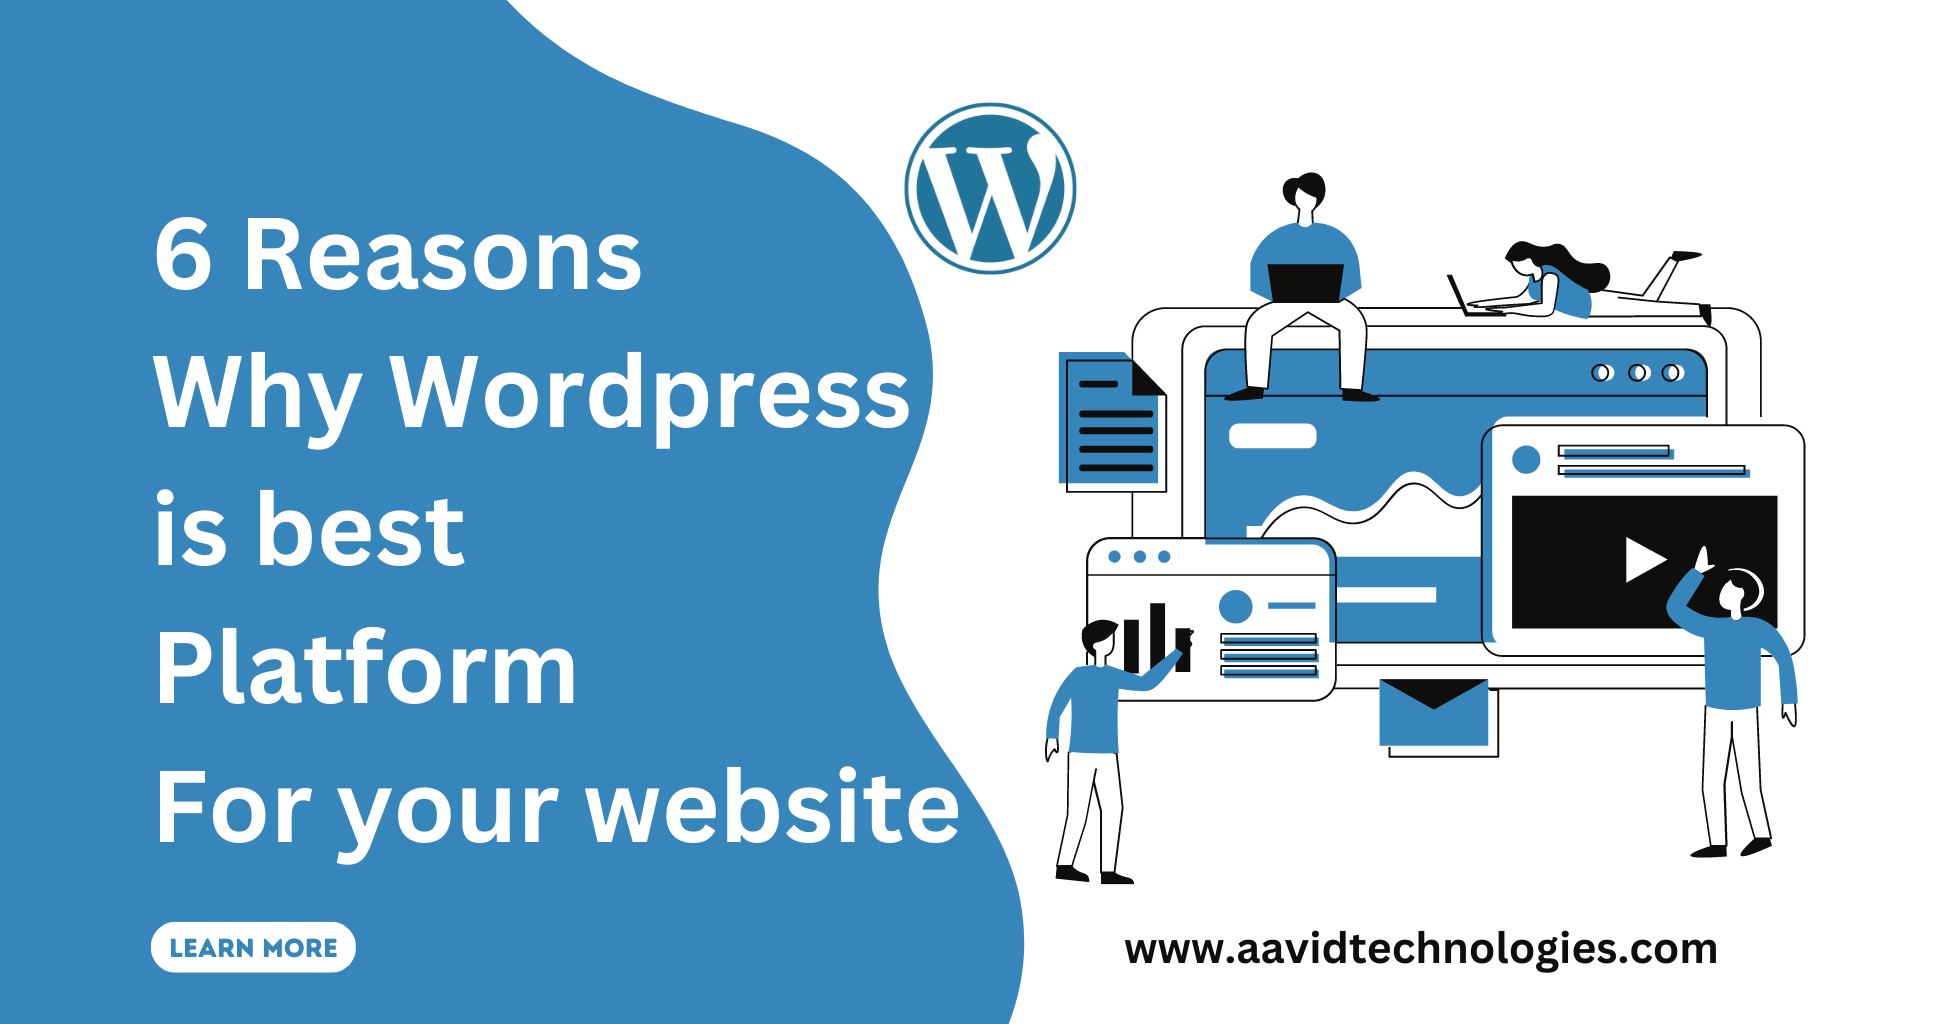 Why WordPress is the Best Platform for Your Website